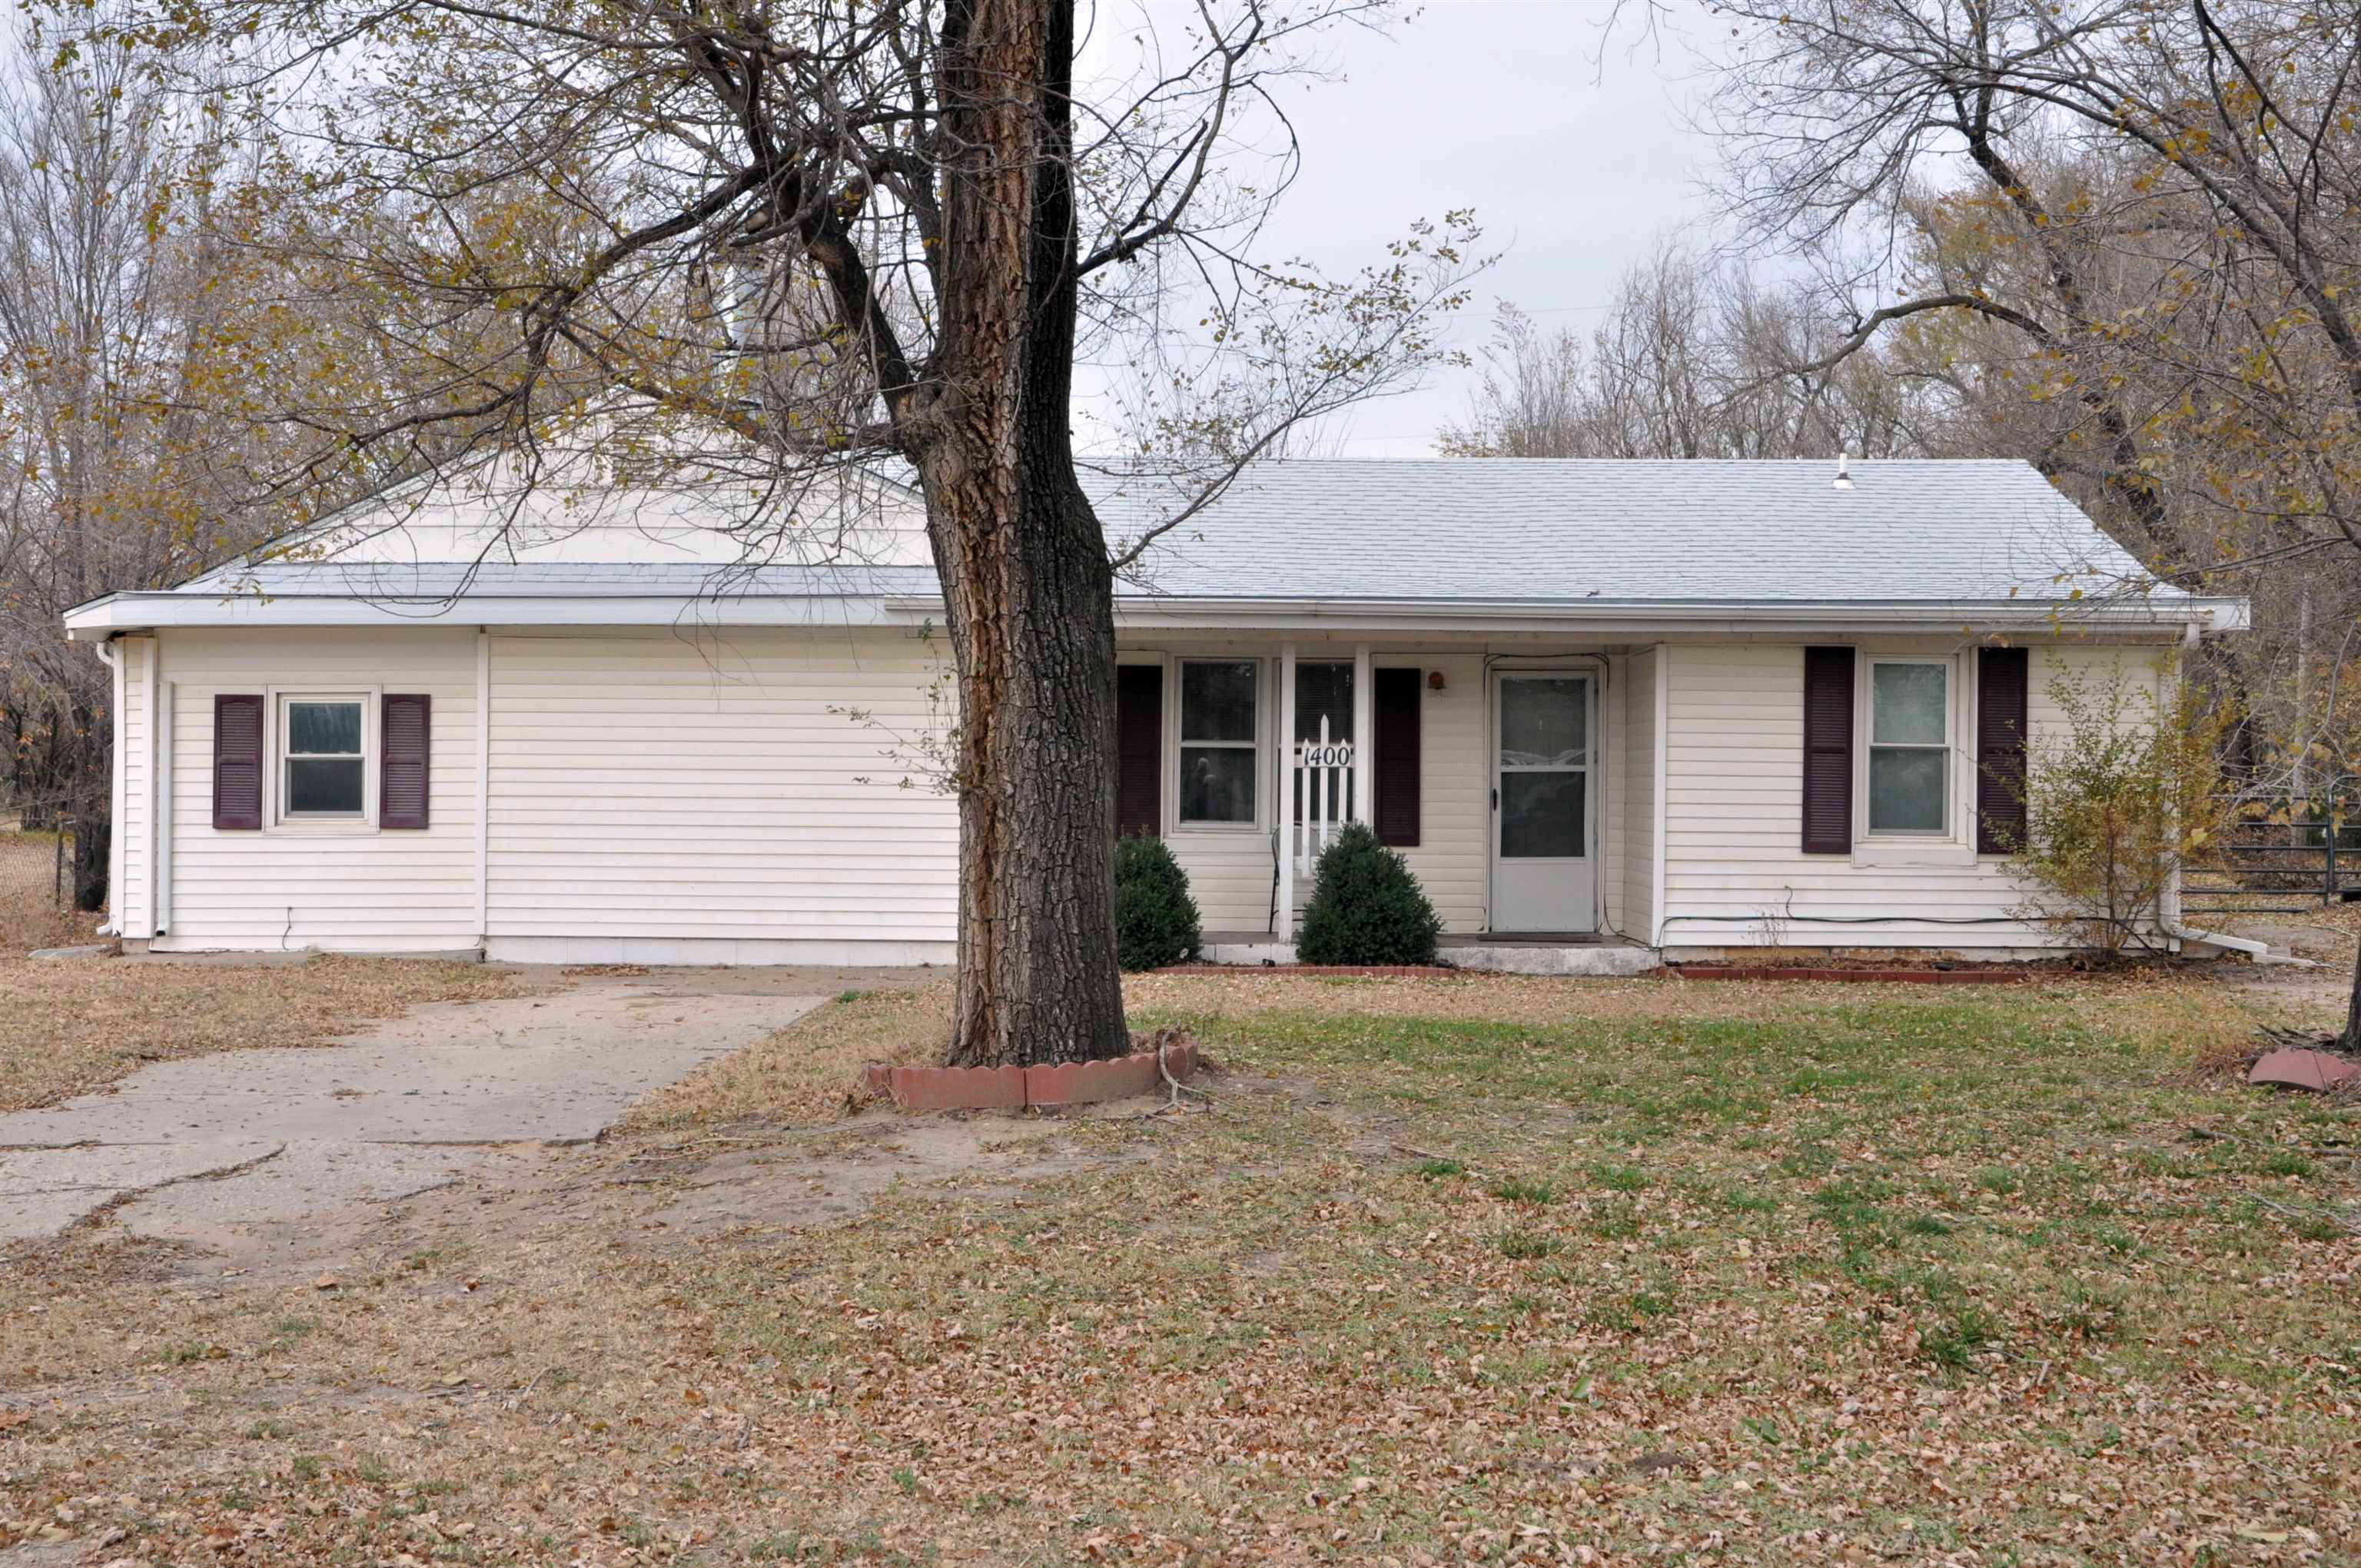 Welcome home to this well-maintained 3bed/1bath/2car home that sits on almost a half acre in south W